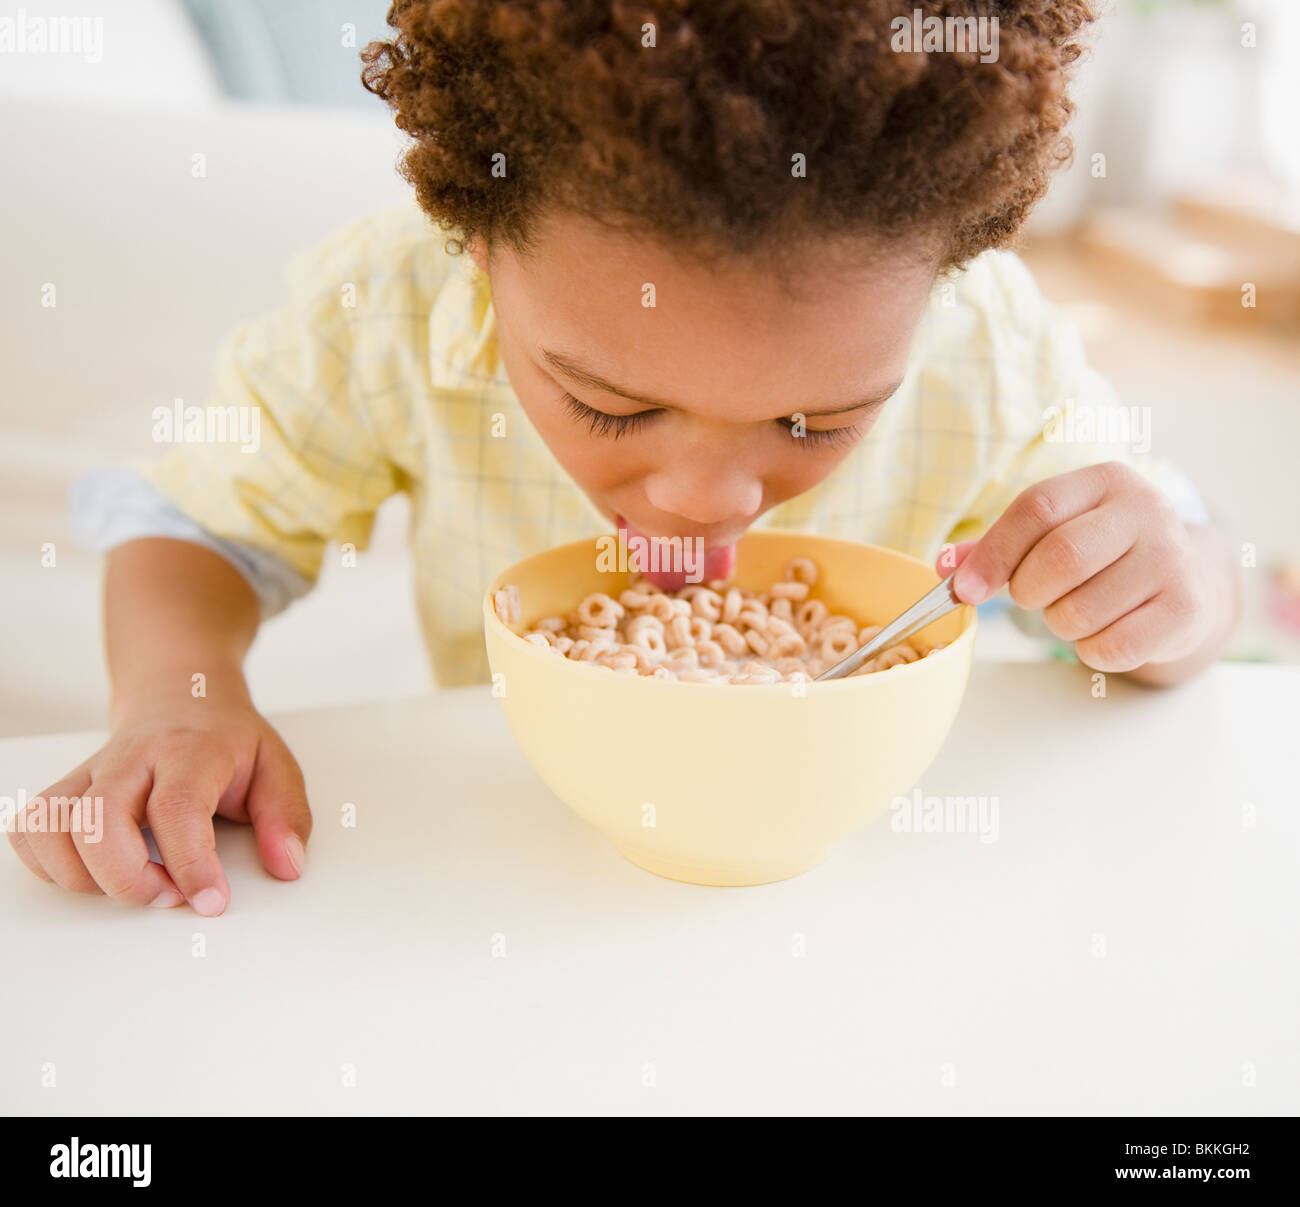 Black boy eating bowl of cereal Stock Photo